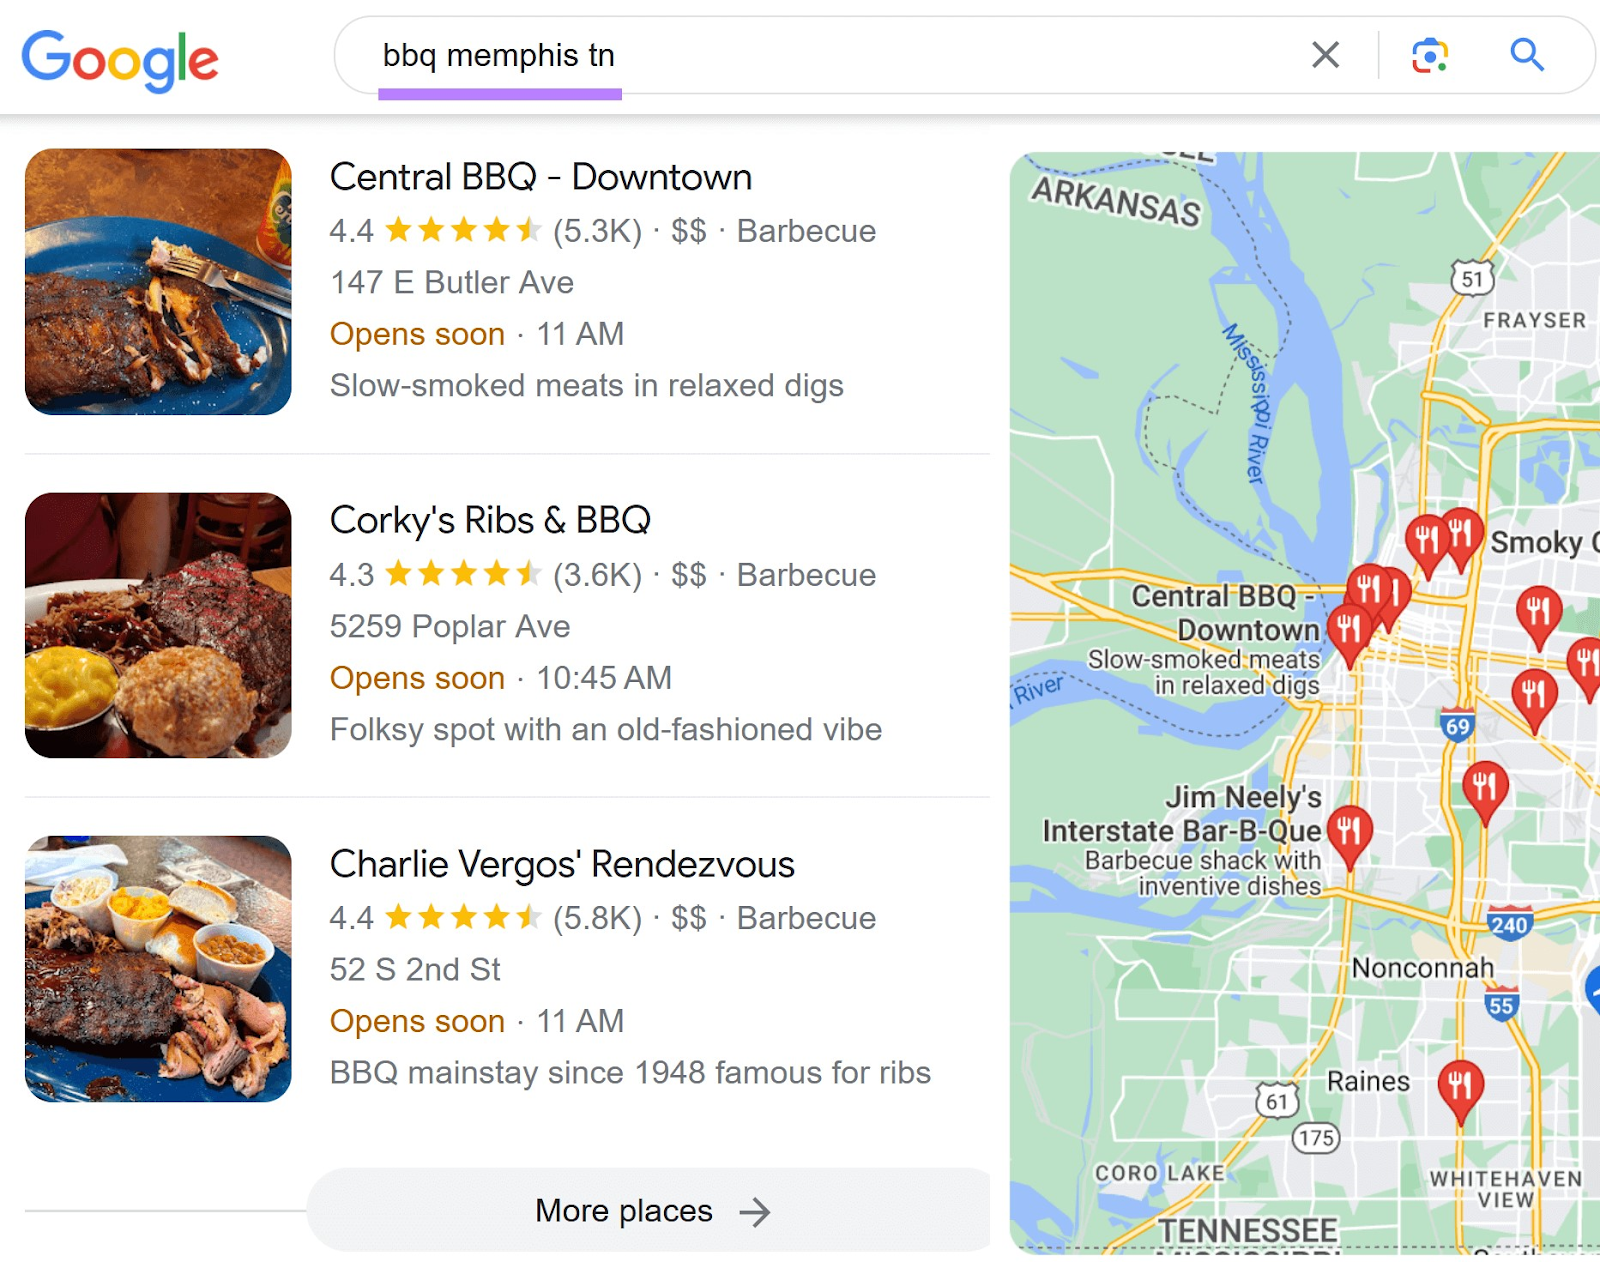 top-ranking results in Google for “bbq memphis tn” search